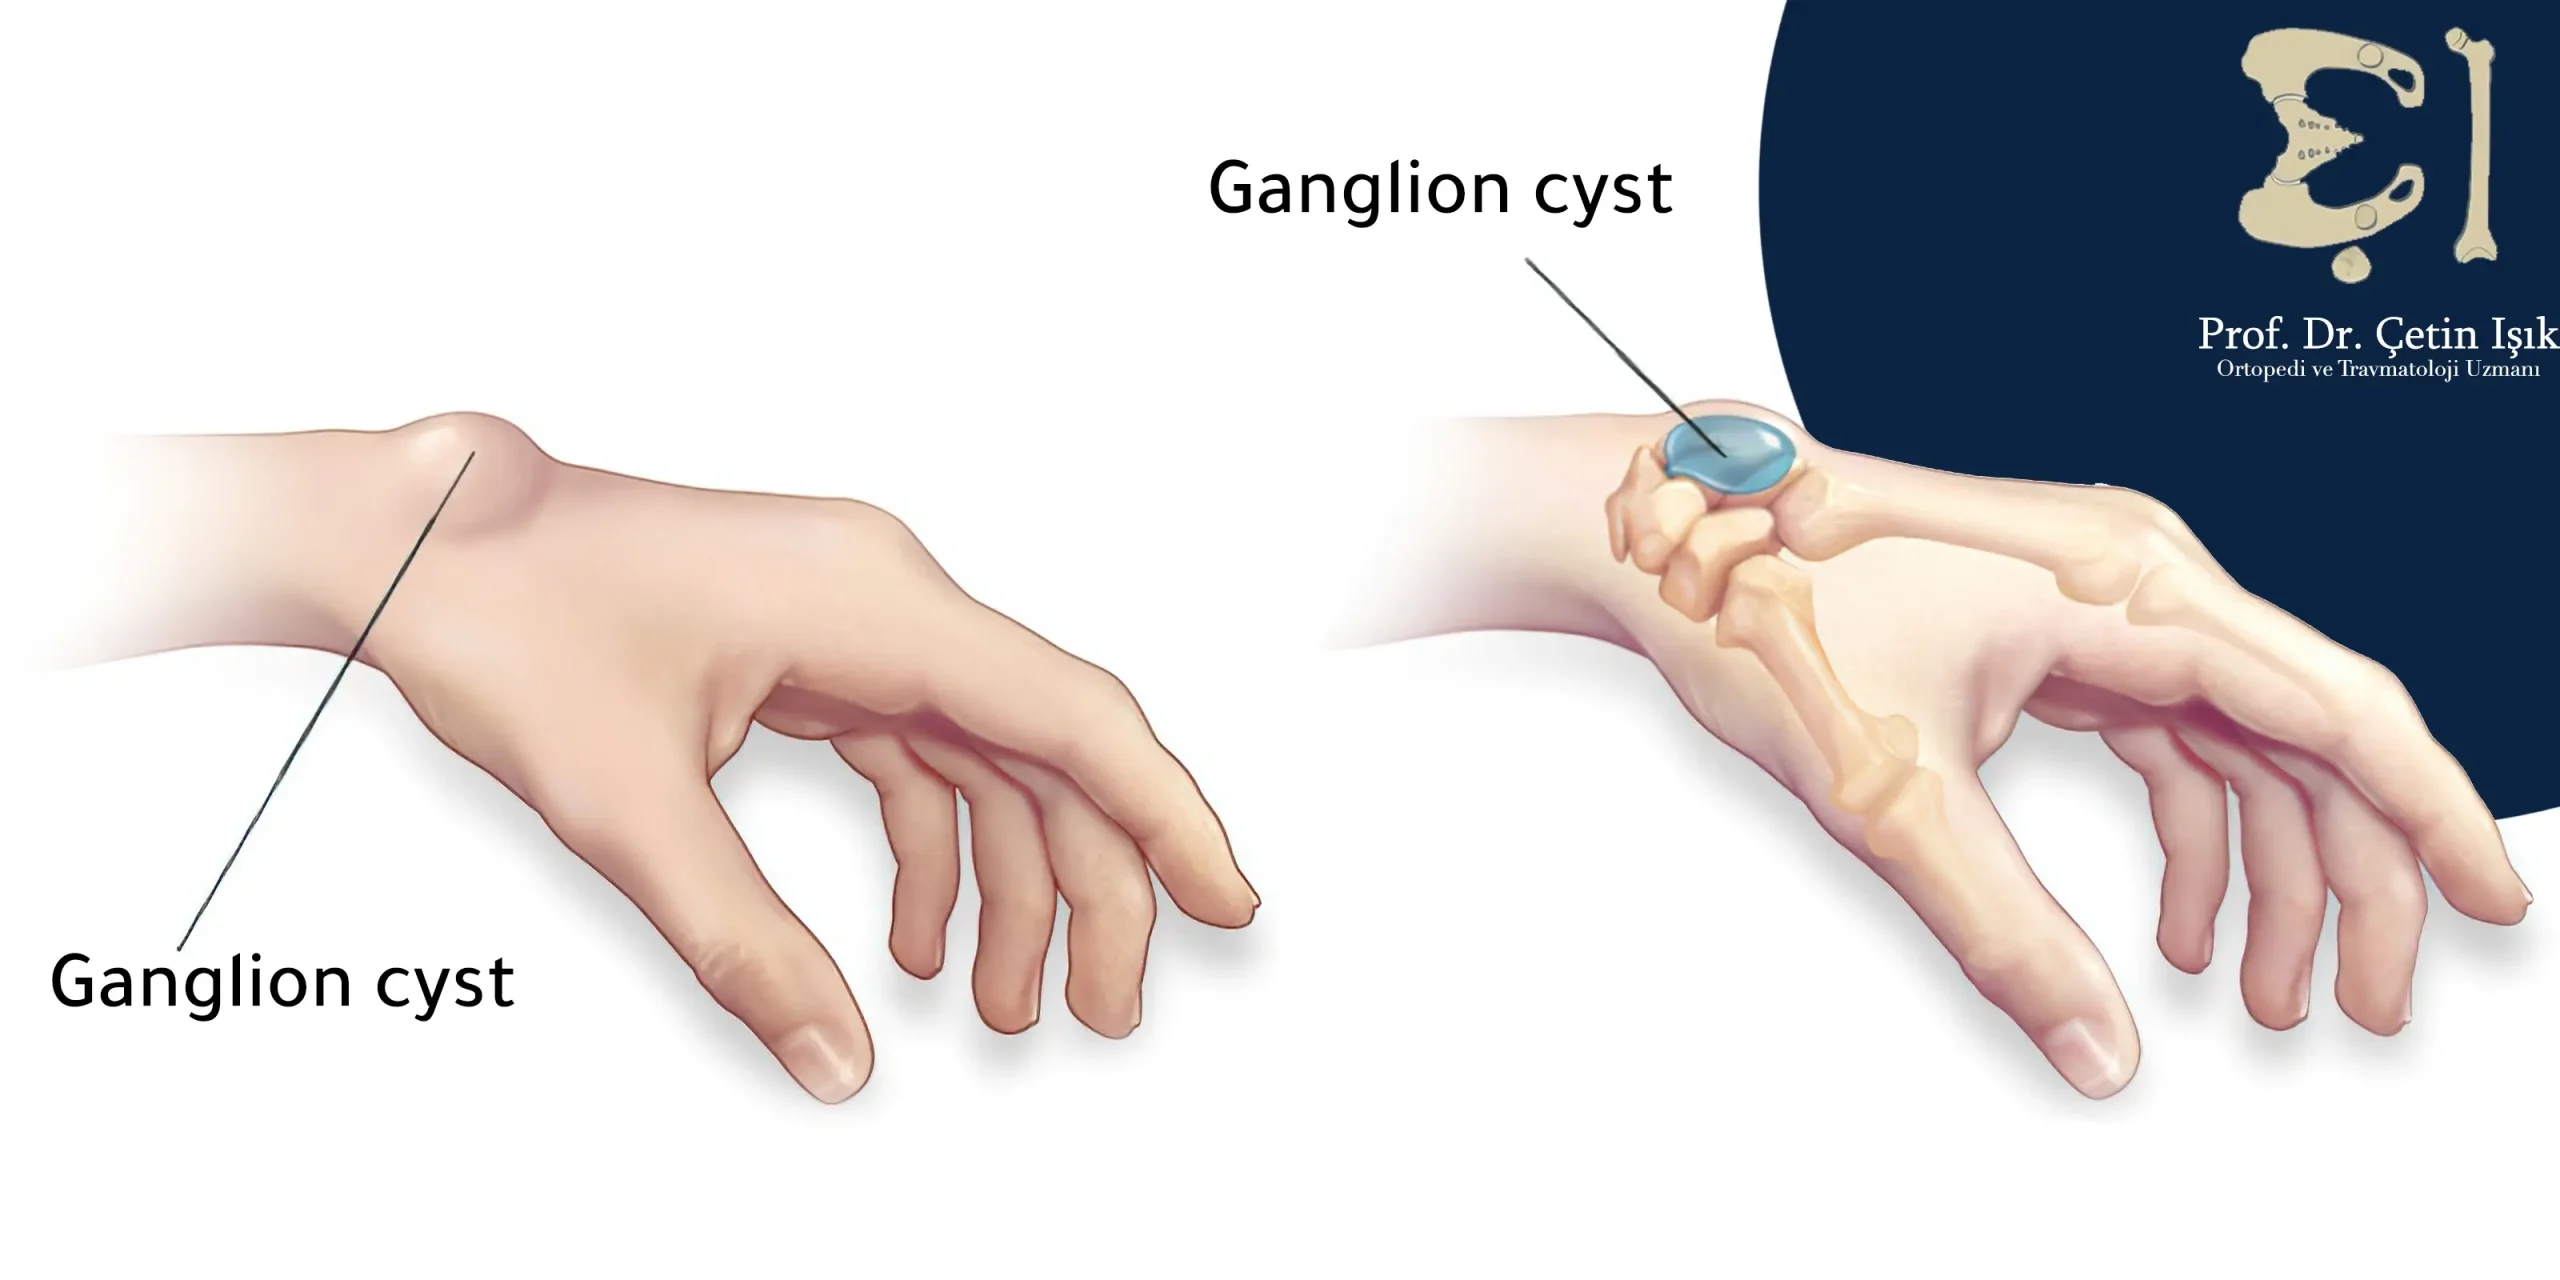 An image showing the ganglion cyst that appears in the same place as the wrist bone protrusion and with the same shape and is differentiated from the protrusion by palpation, as the cyst is soft